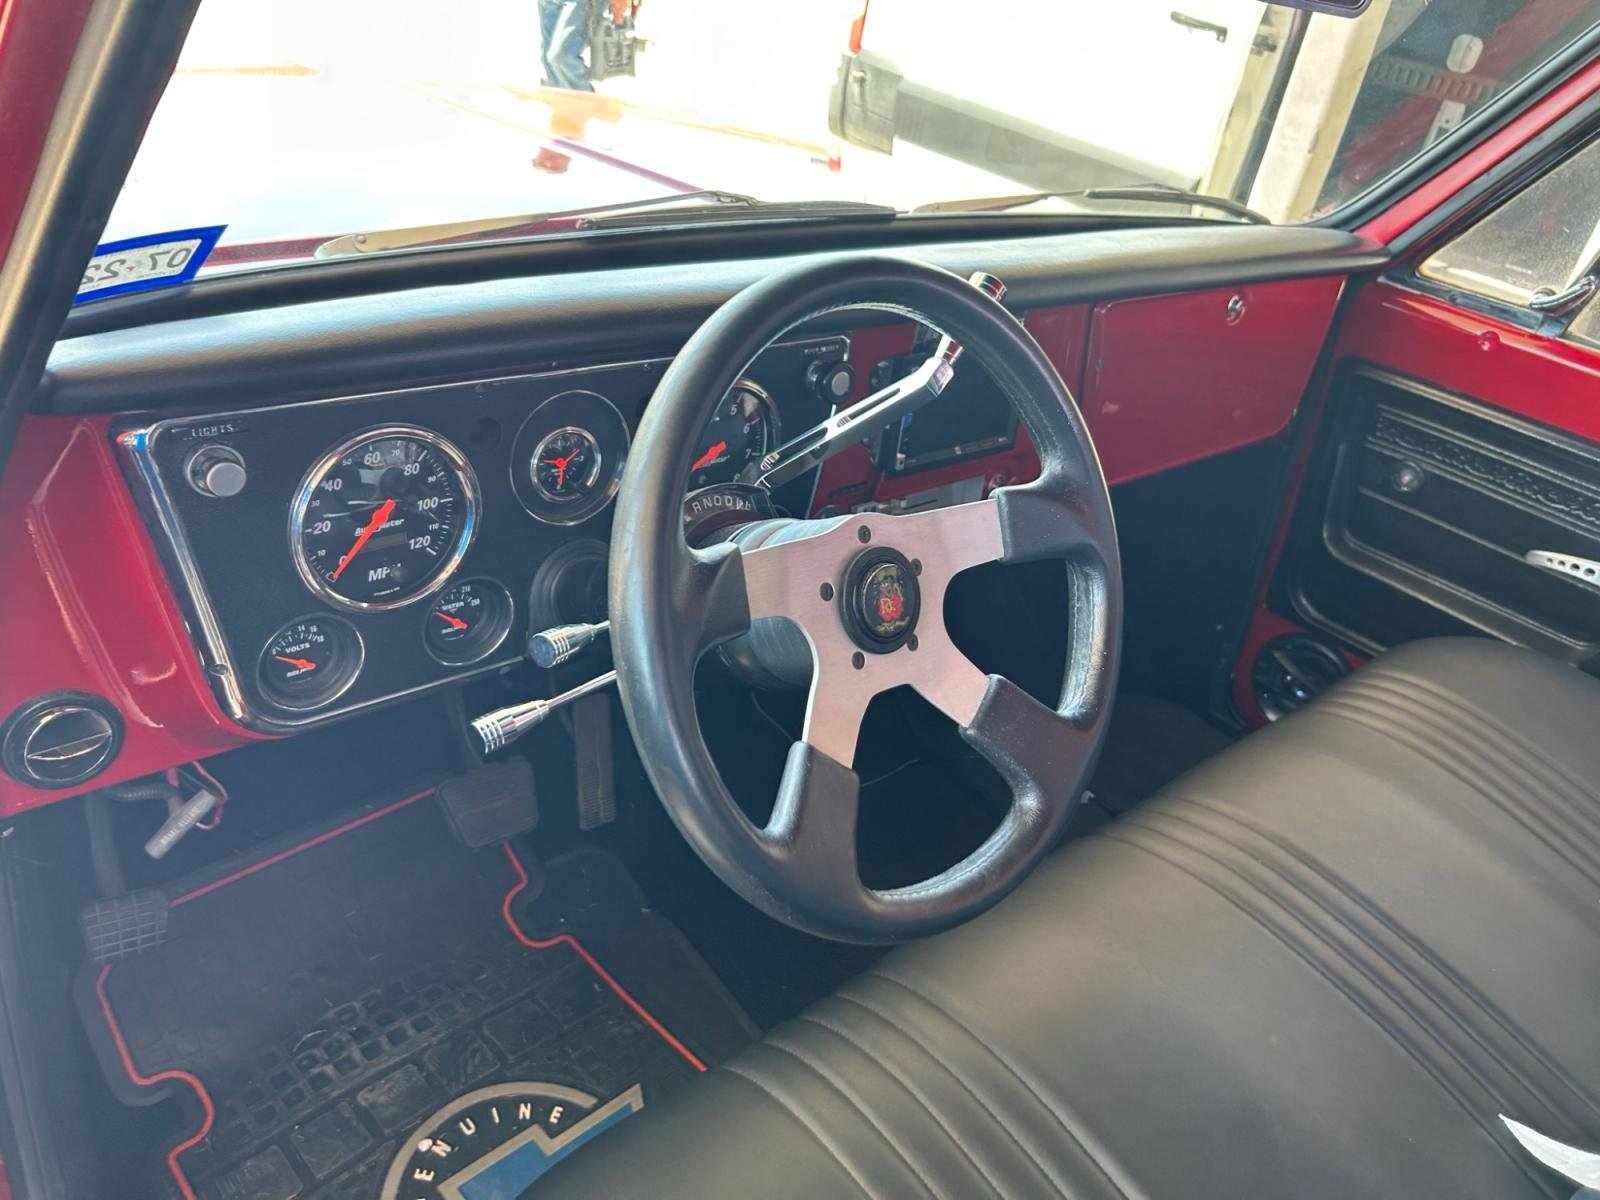 1972 Red Chevrolet C10 (CCE142A1201) , Automatic transmission, located at 1687 Business 35 S, New Braunfels, TX, 78130, (830) 625-7159, 29.655487, -98.051491 - 580 Horse Power - Photo #8